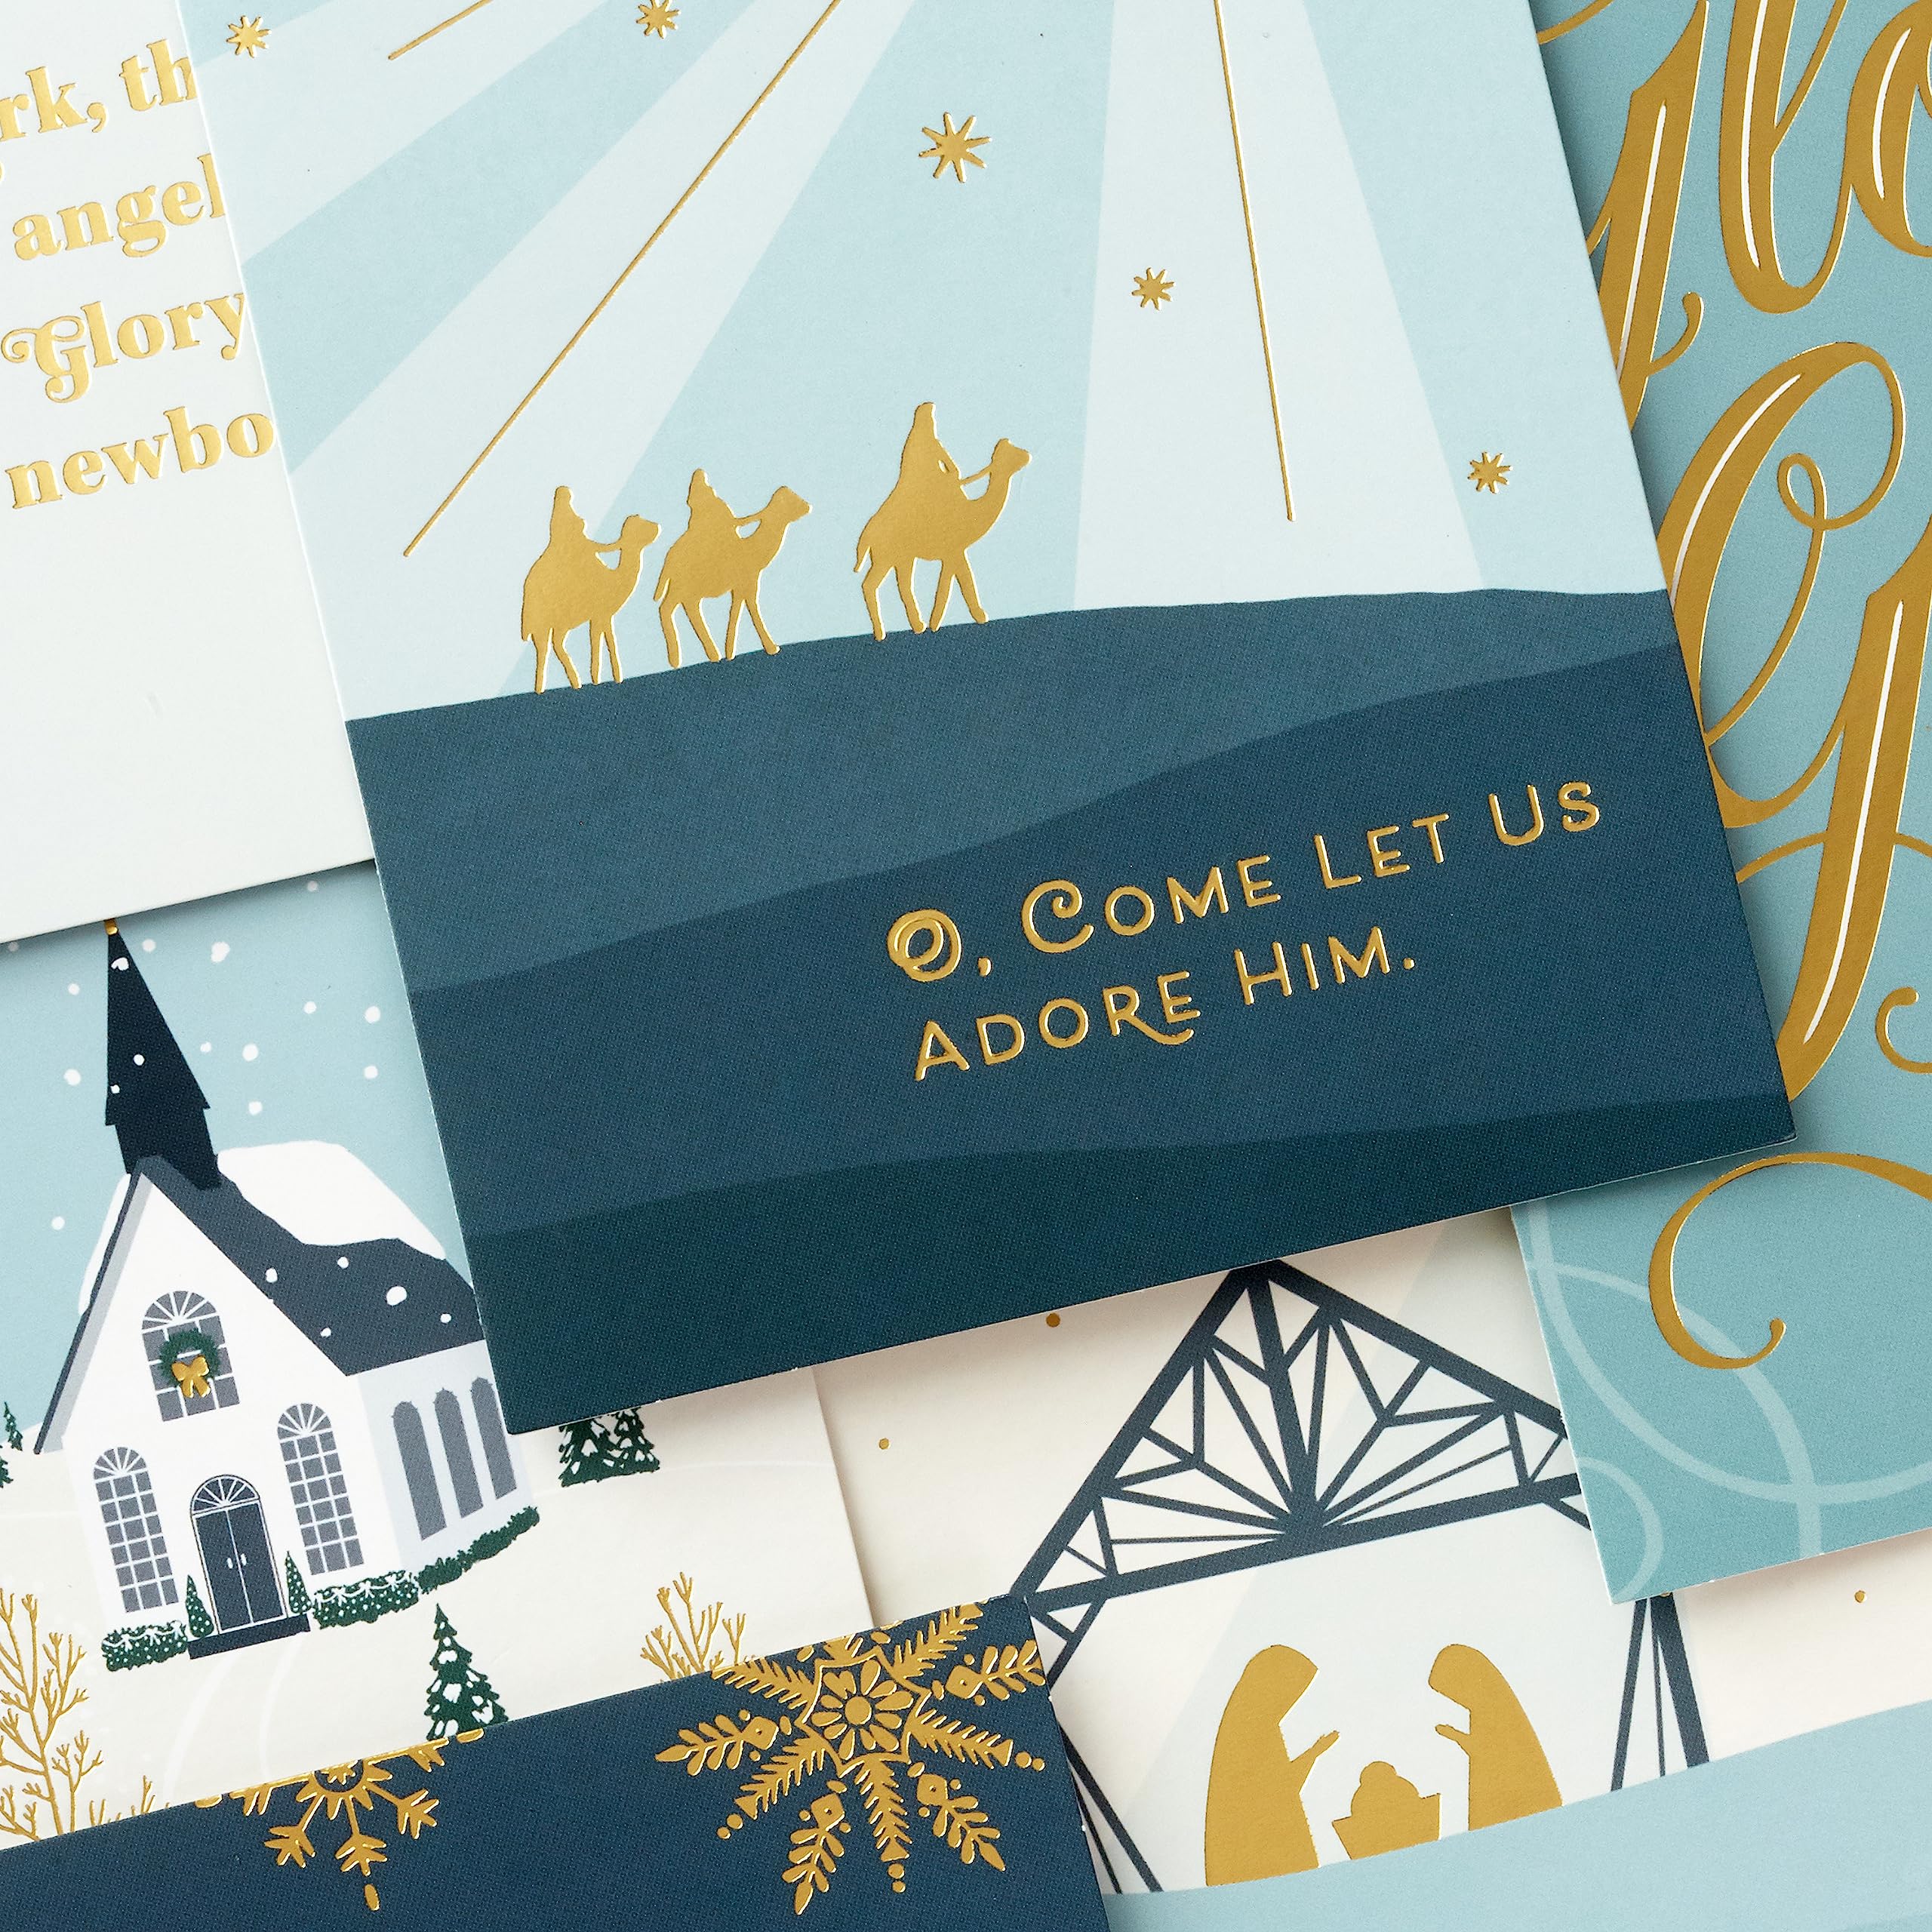 Hallmark Religious Christmas Card Assortment, Heavenly Peace (36 Cards and Envelopes) Dusty Blue and Gold Foil